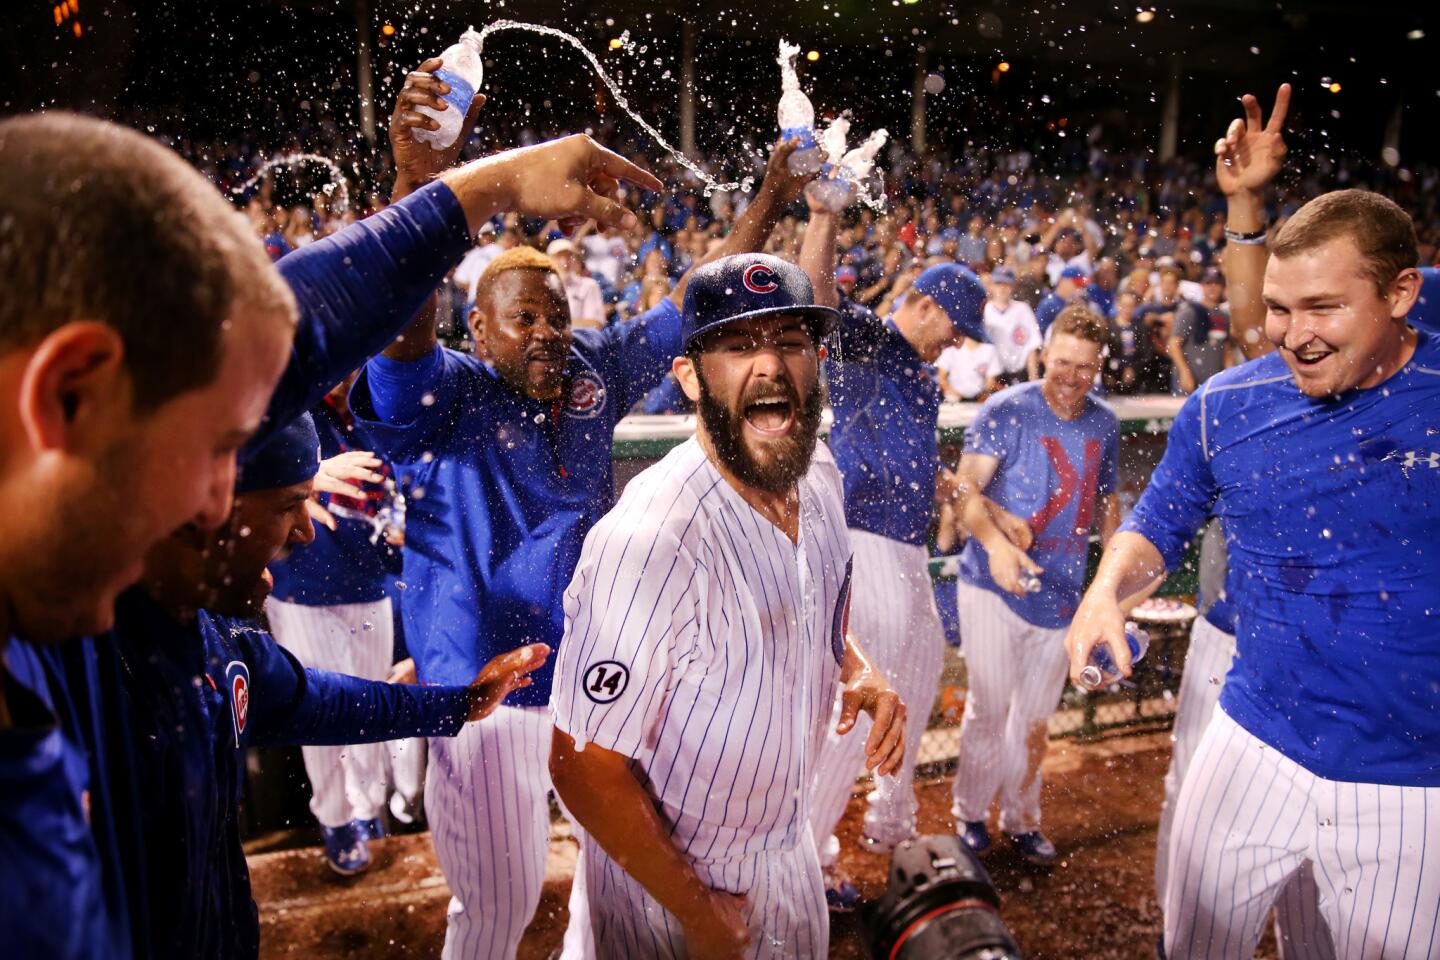 Jake Arrieta is doused by his teammates after recording his 20th win of the season.